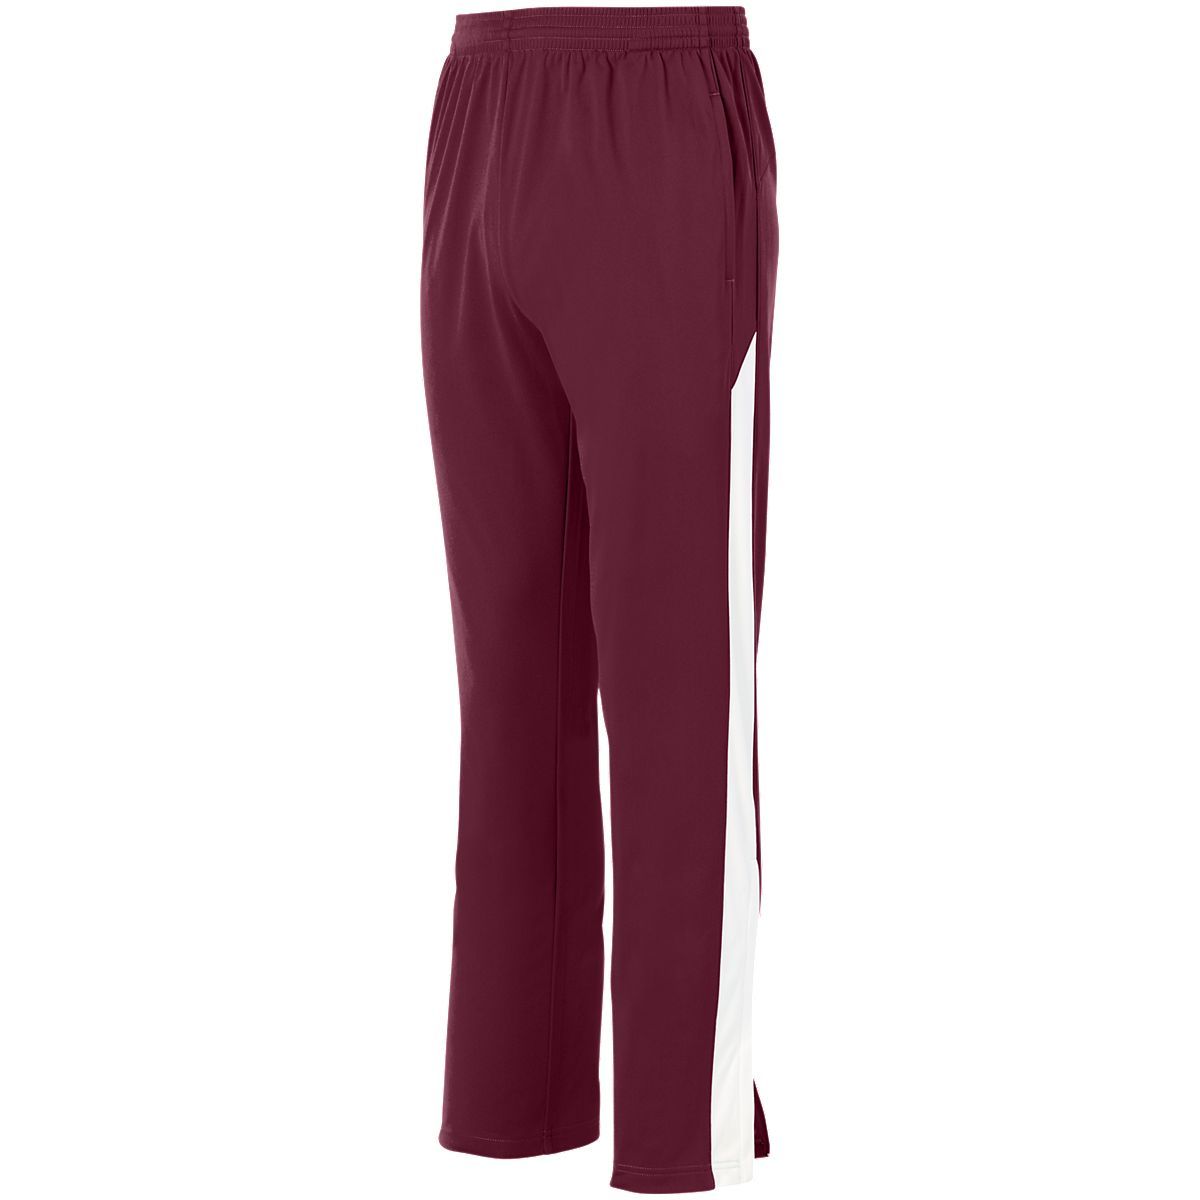 Augusta Sportswear Medalist Pant 2.0 in Maroon/White  -Part of the Adult, Adult-Pants, Pants, Augusta-Products product lines at KanaleyCreations.com